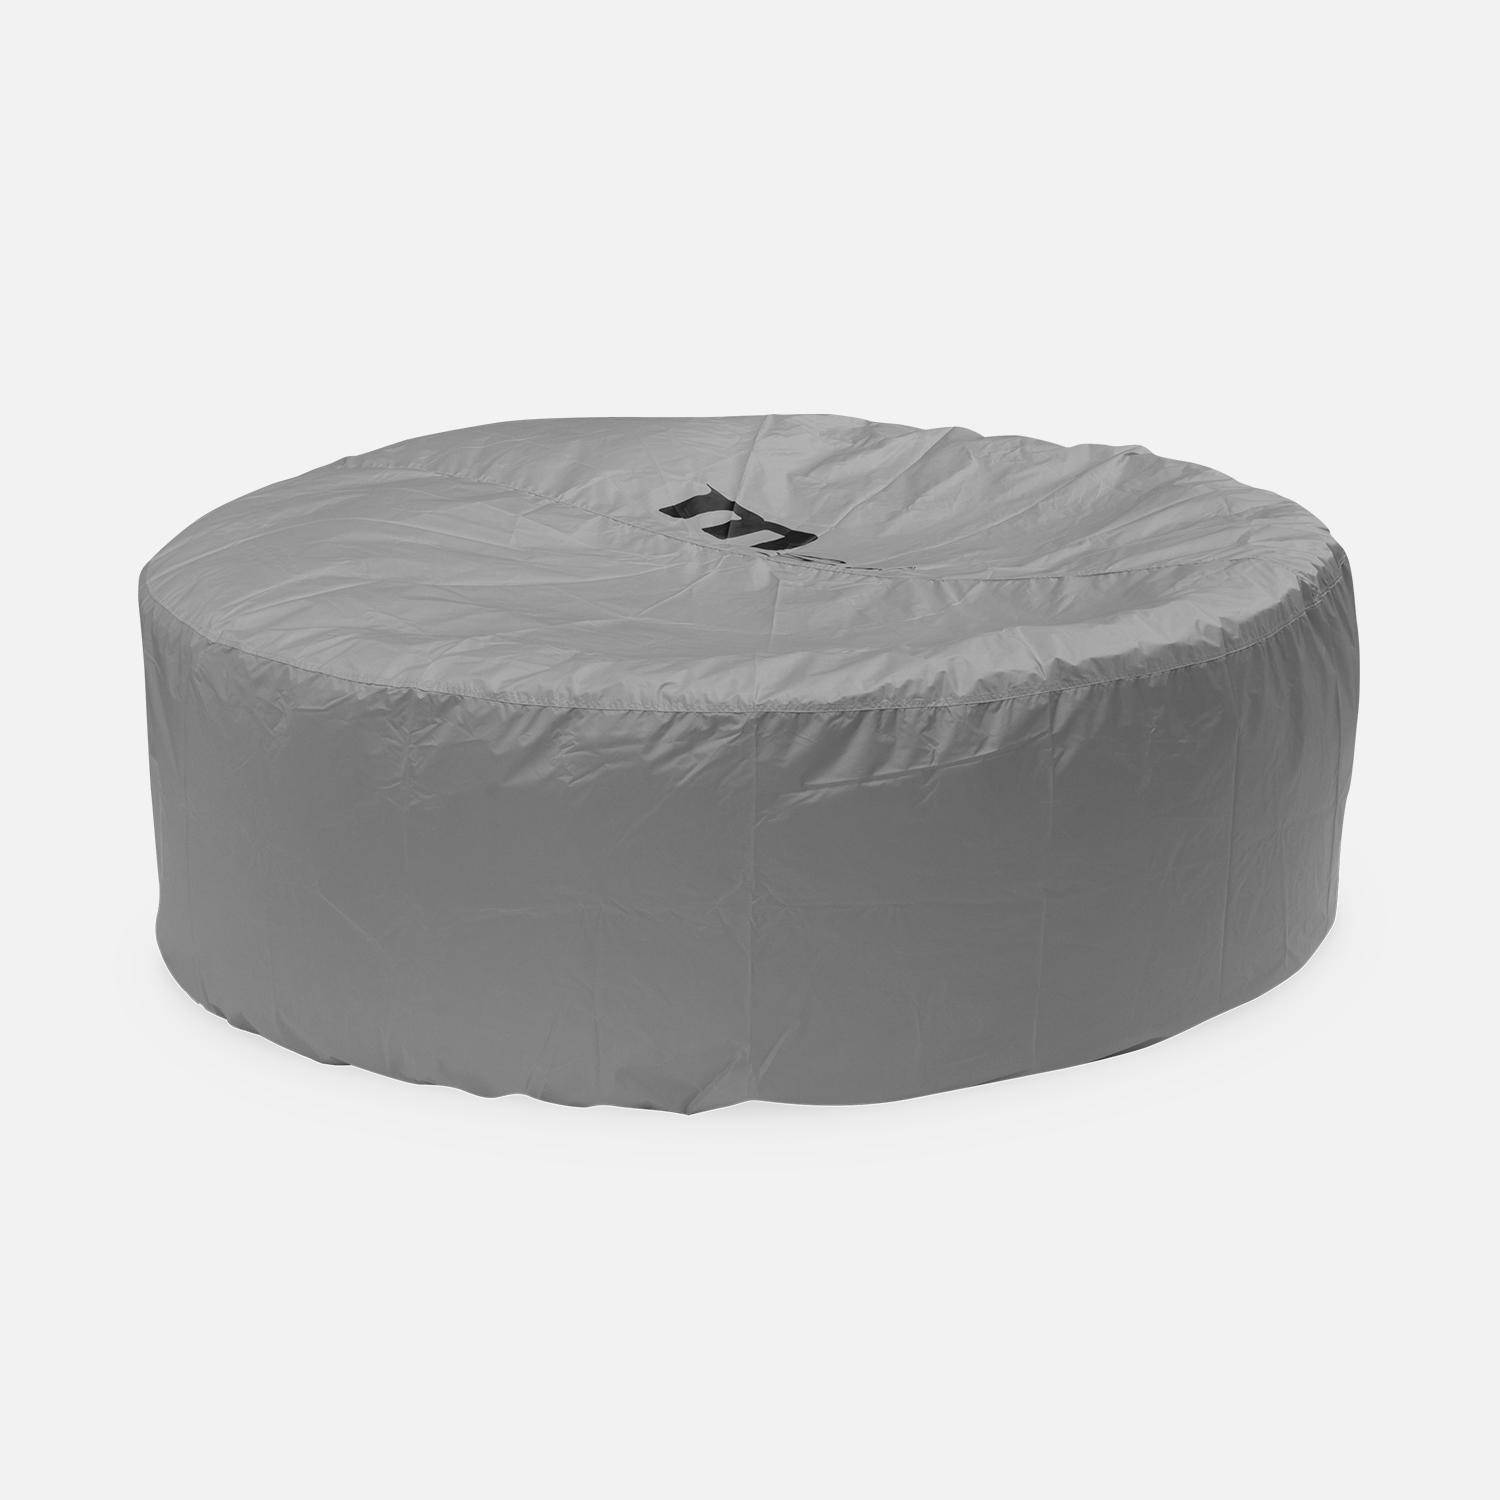 Protective cover for 6-person round MSPA inflatable hot tub – Ø 215x70cm,sweeek,Photo1